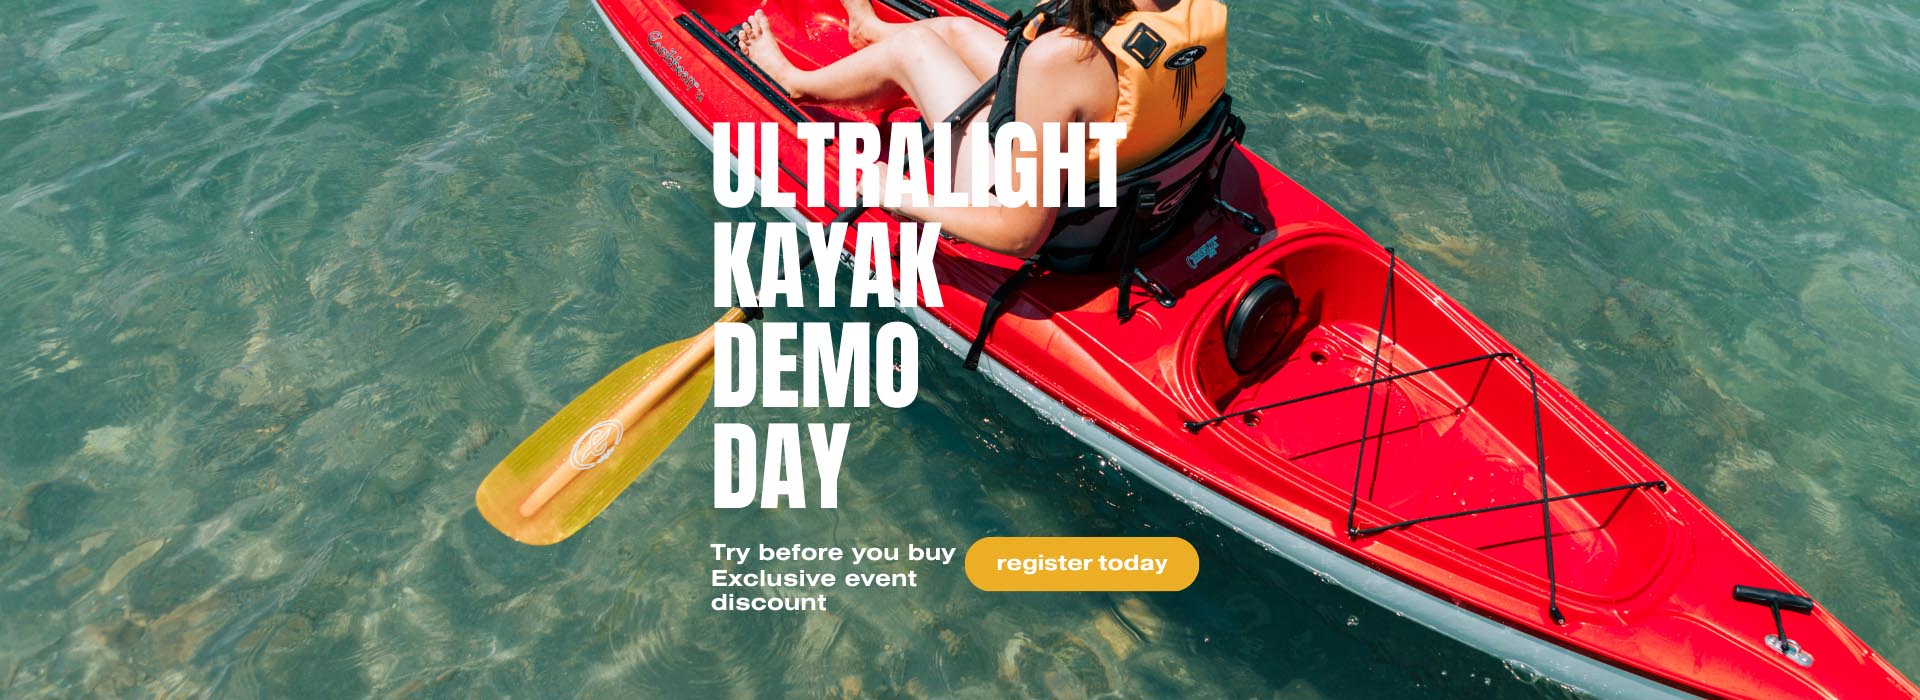 Eddyline Ultralight Kayaks demo day April 25th 2-6pm at Kenco Outfitters. A bright red kayak seen from above, paddling on clear, turquoise water.